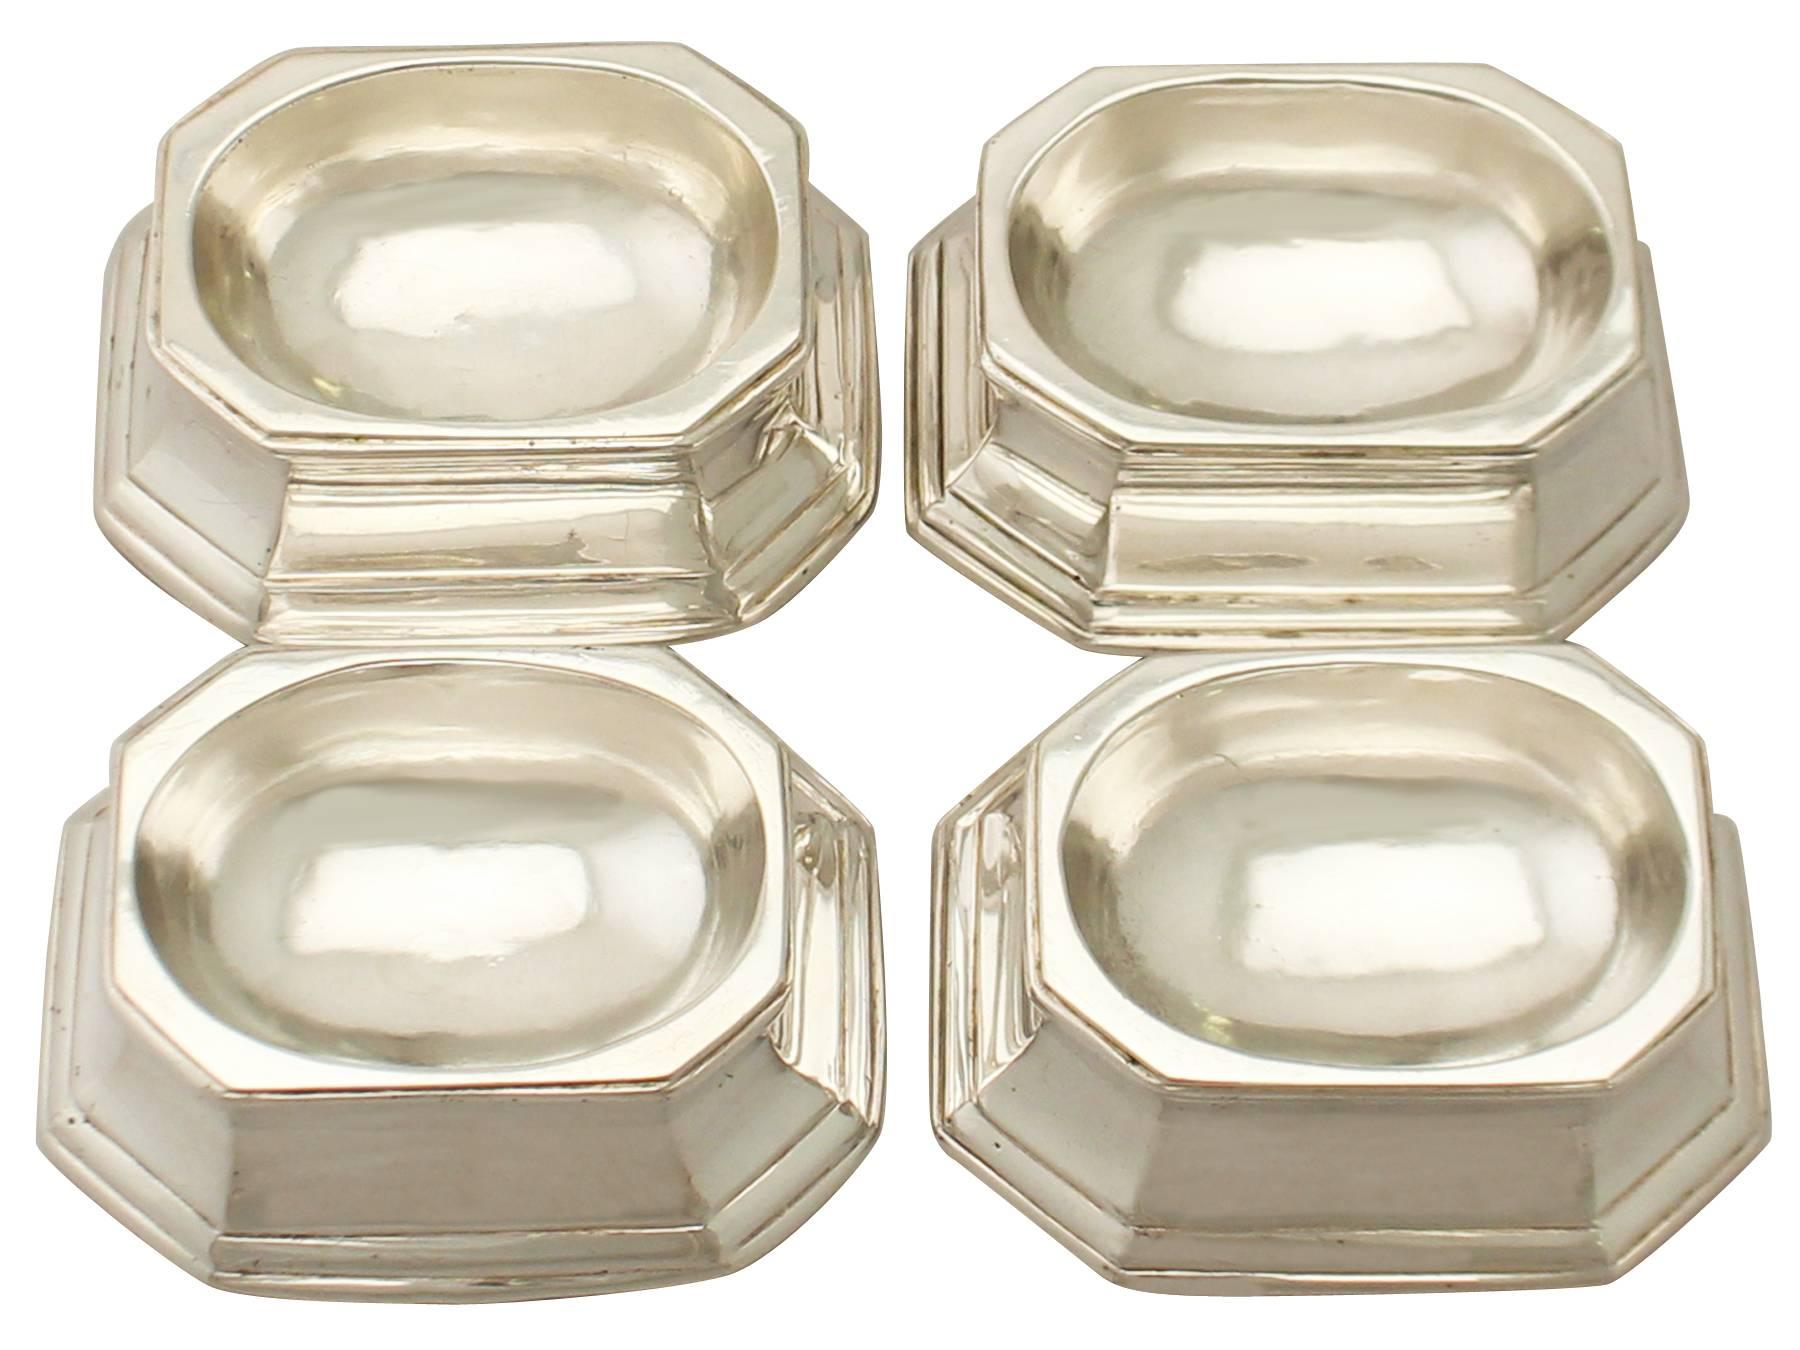 An exceptional, fine and impressive set of four antique Georgian English cast sterling silver trencher salts, part of our silver cruet and condiments collection

These exceptional antique George III sterling silver trencher salts have a plain